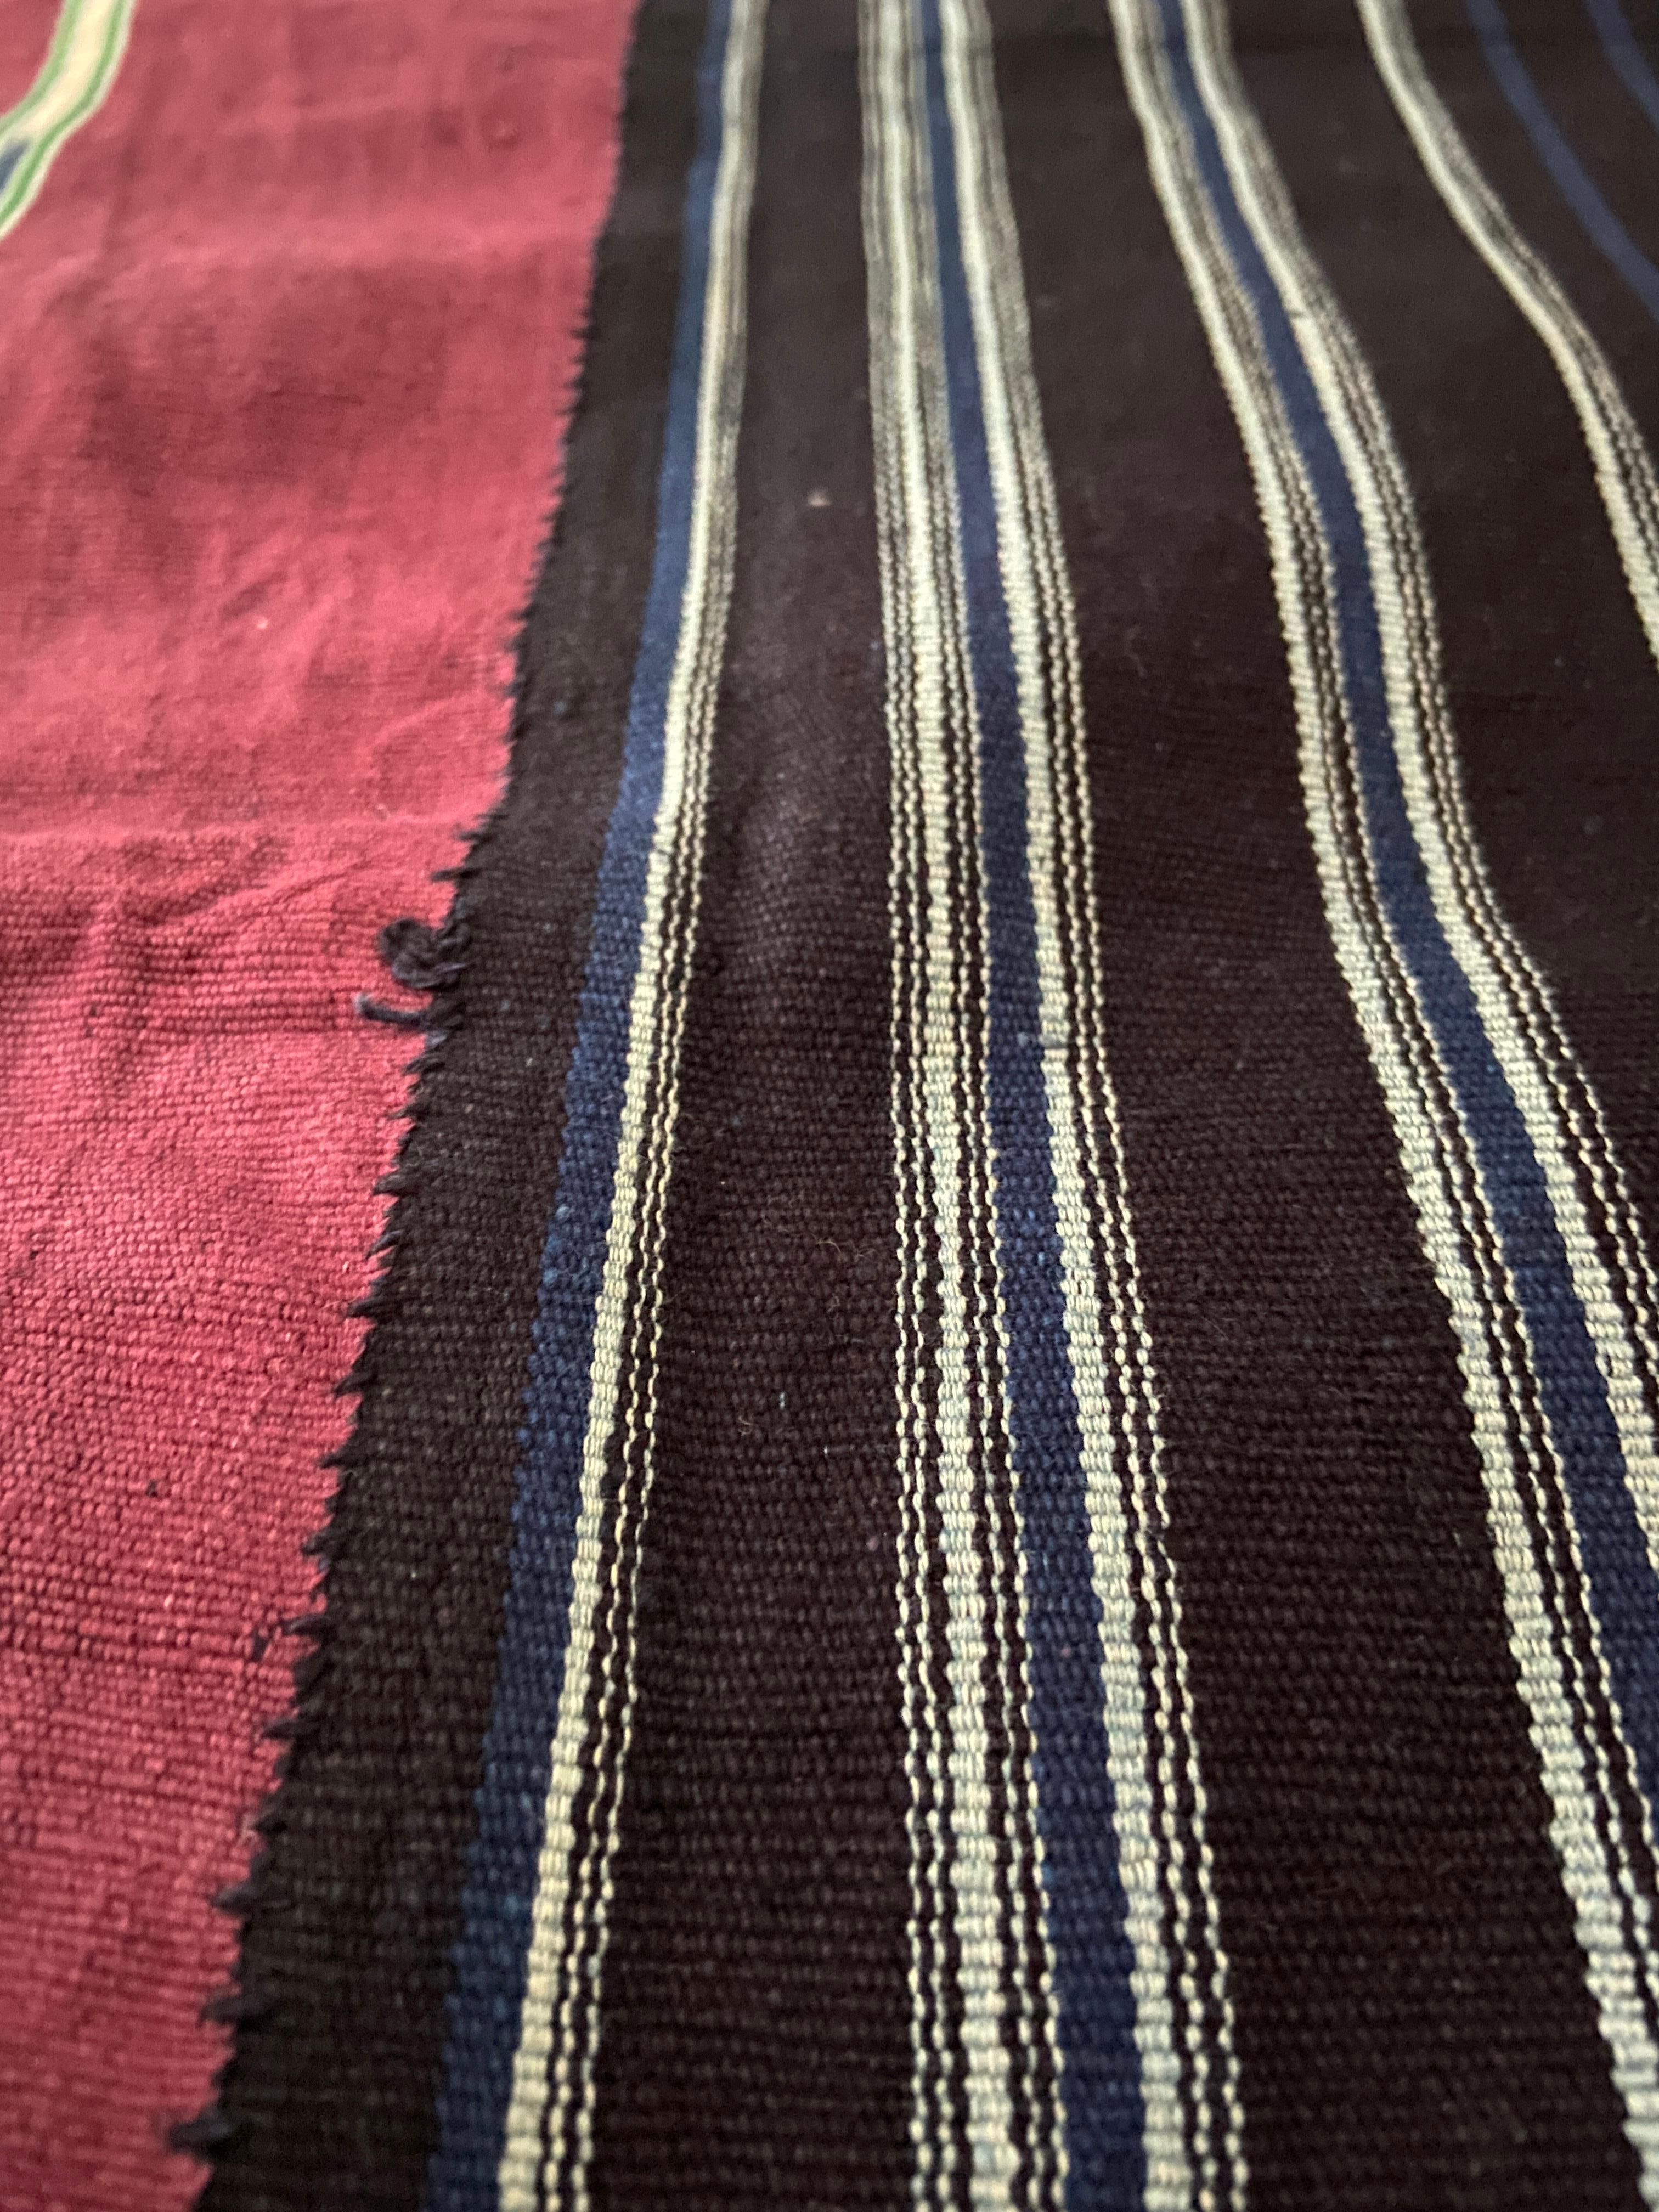 Mid-20th Century Vintage Ikat Patterned Woman's Weave Wrapper Cloth in Indigo, Nigeria 1950's